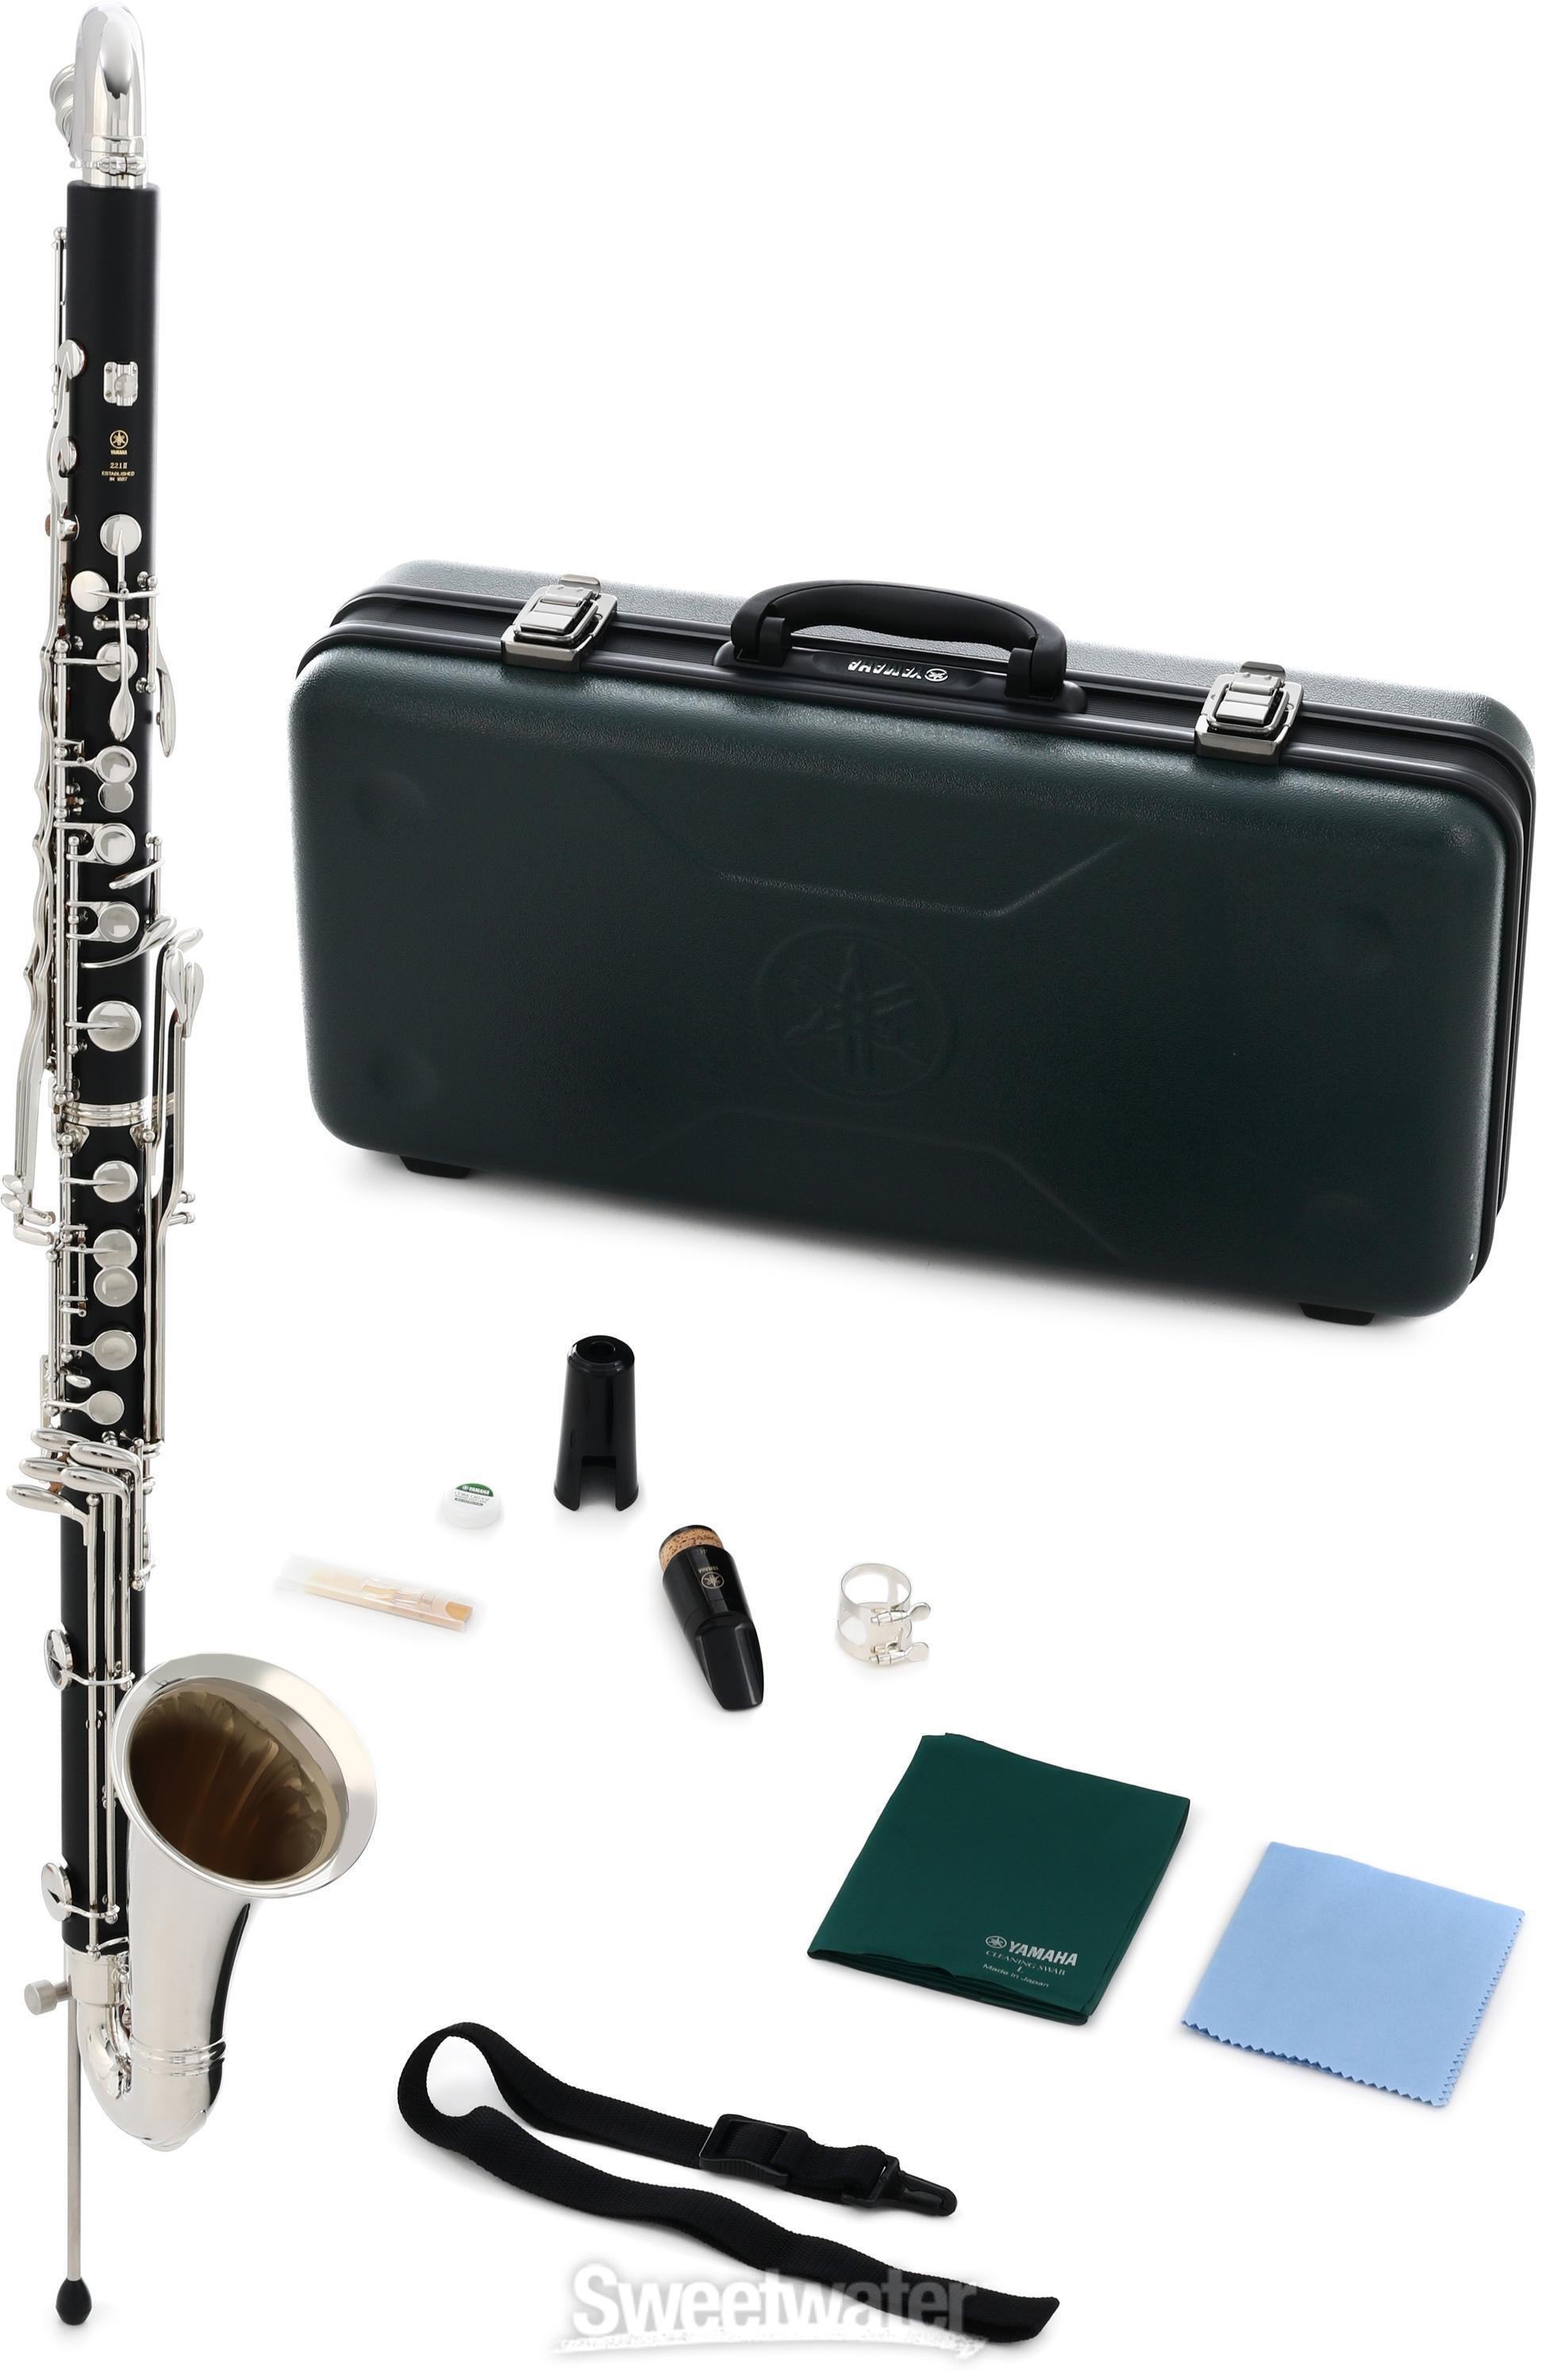 Yamaha YCL-221II Student Bass Clarinet with Nickel Keys | Sweetwater